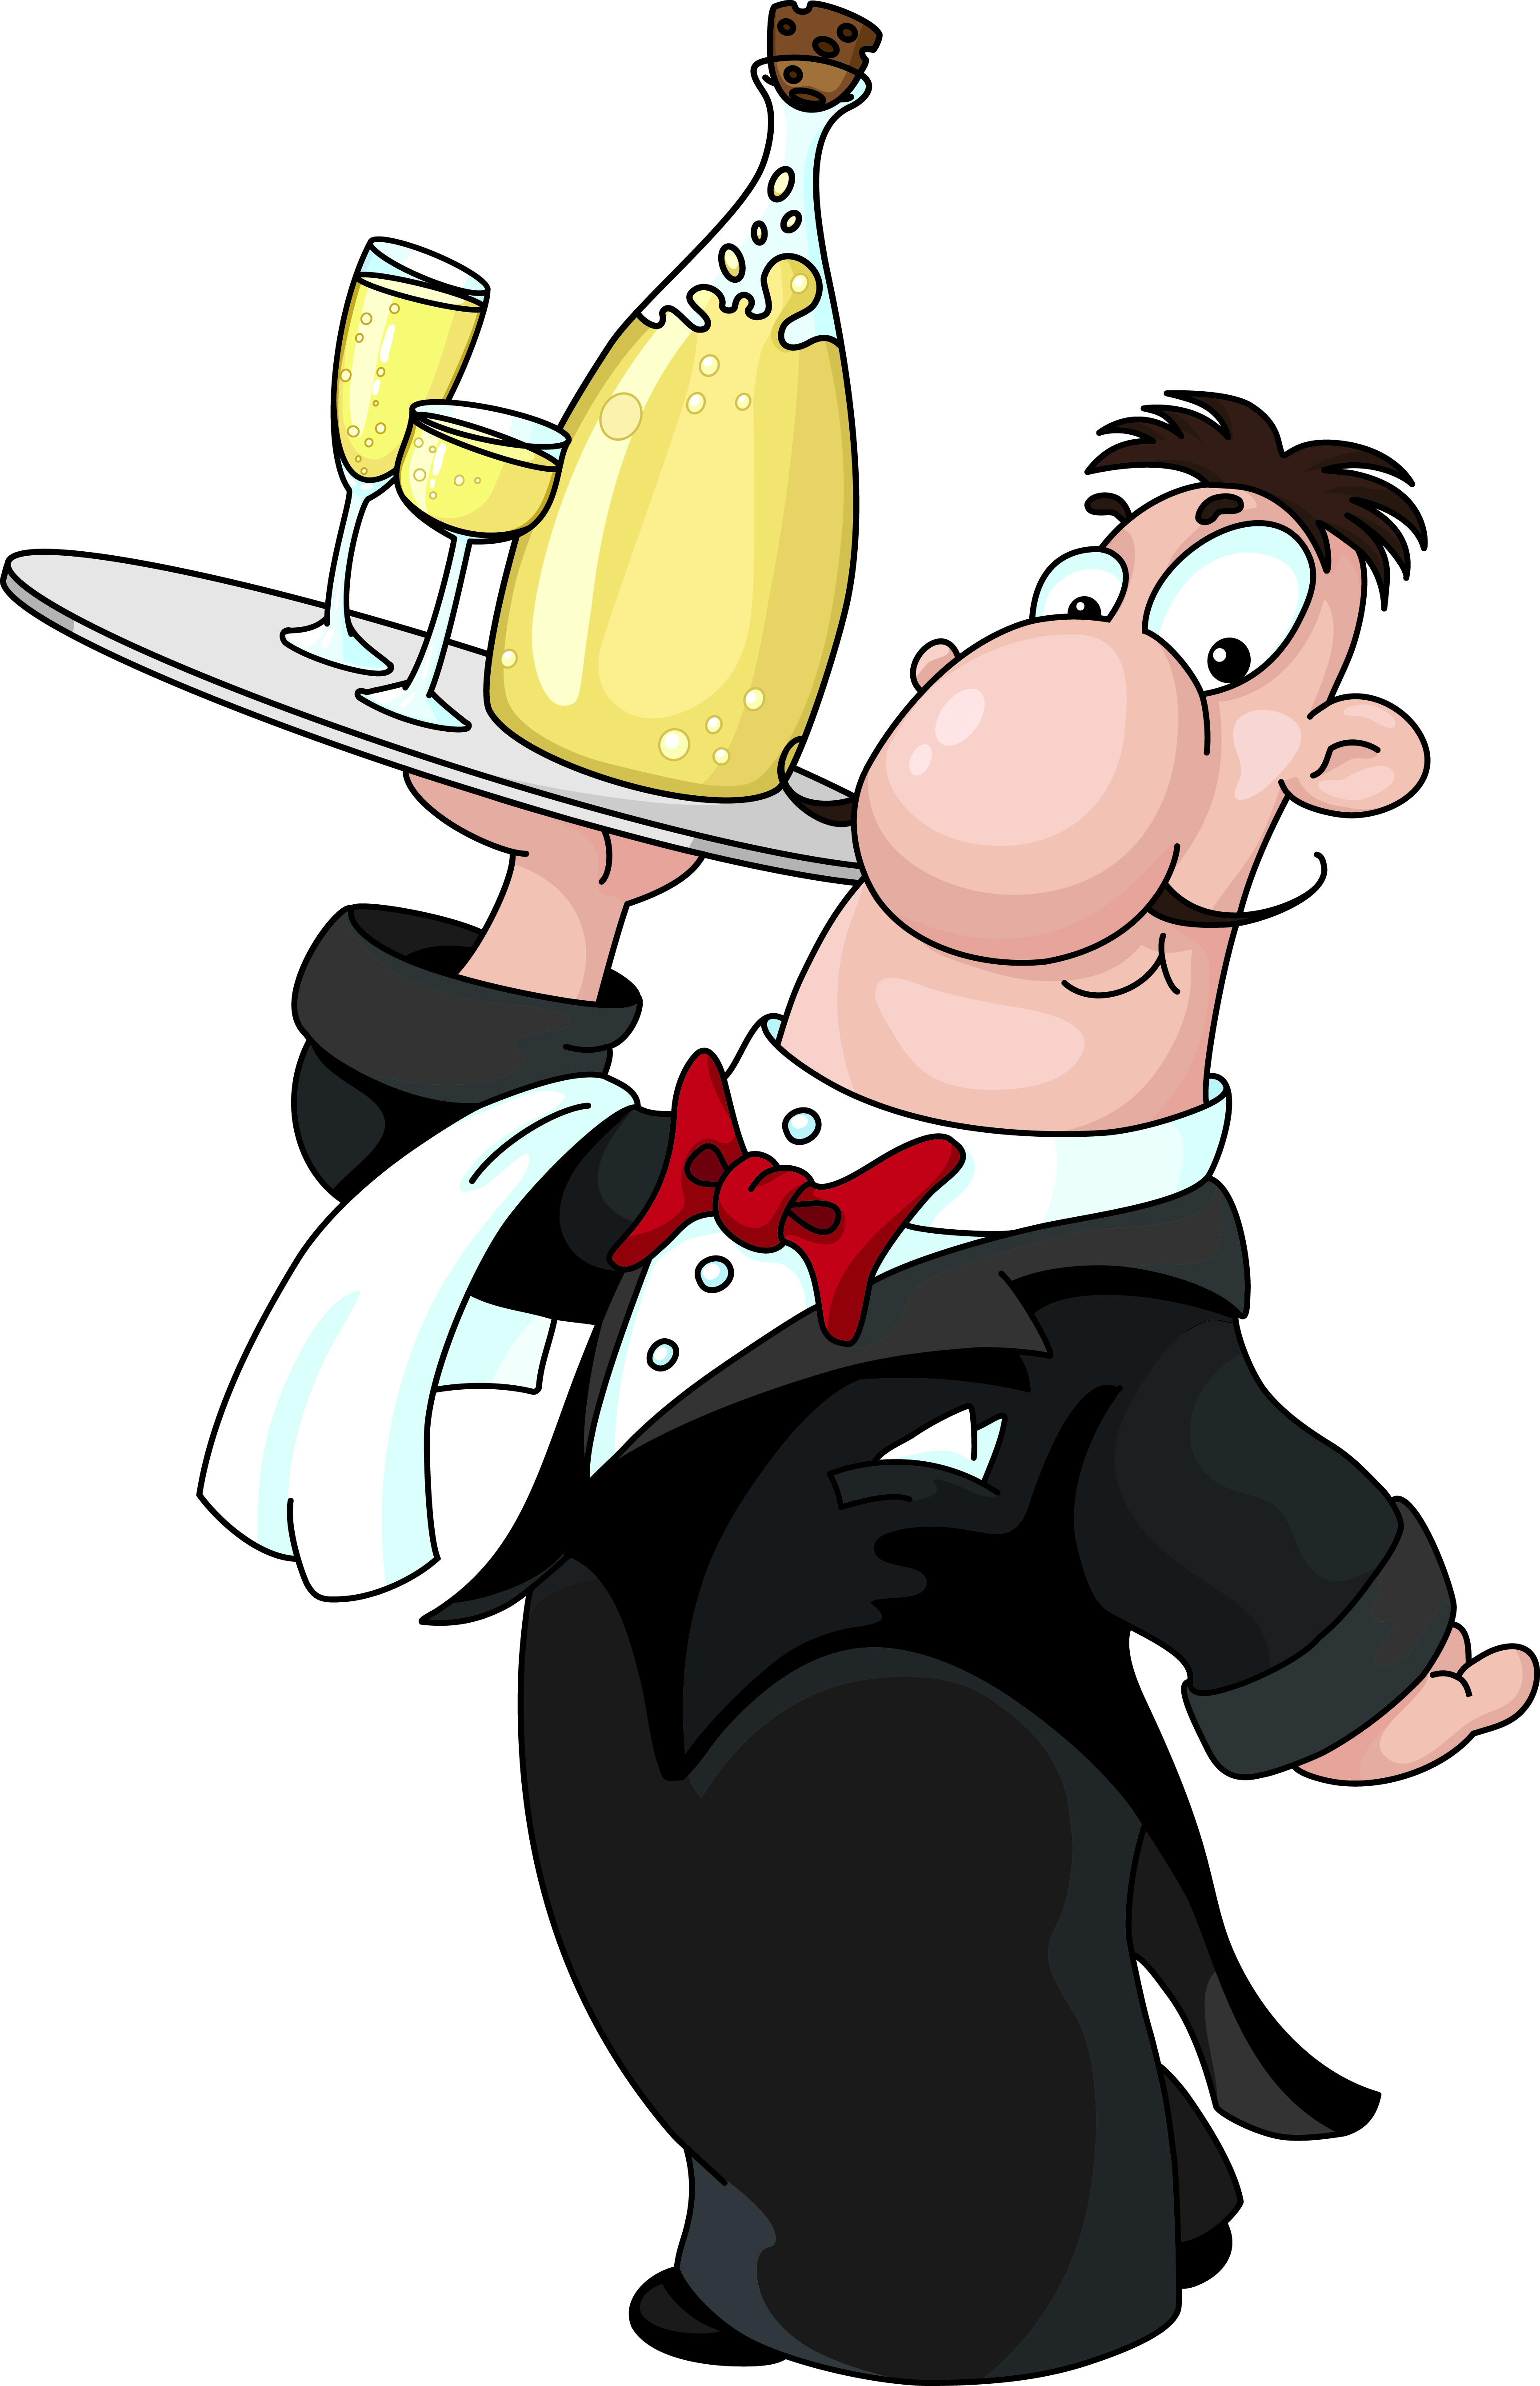 Cartoon image of chefs and waiters 04 vector Free Vector - ClipArt ...